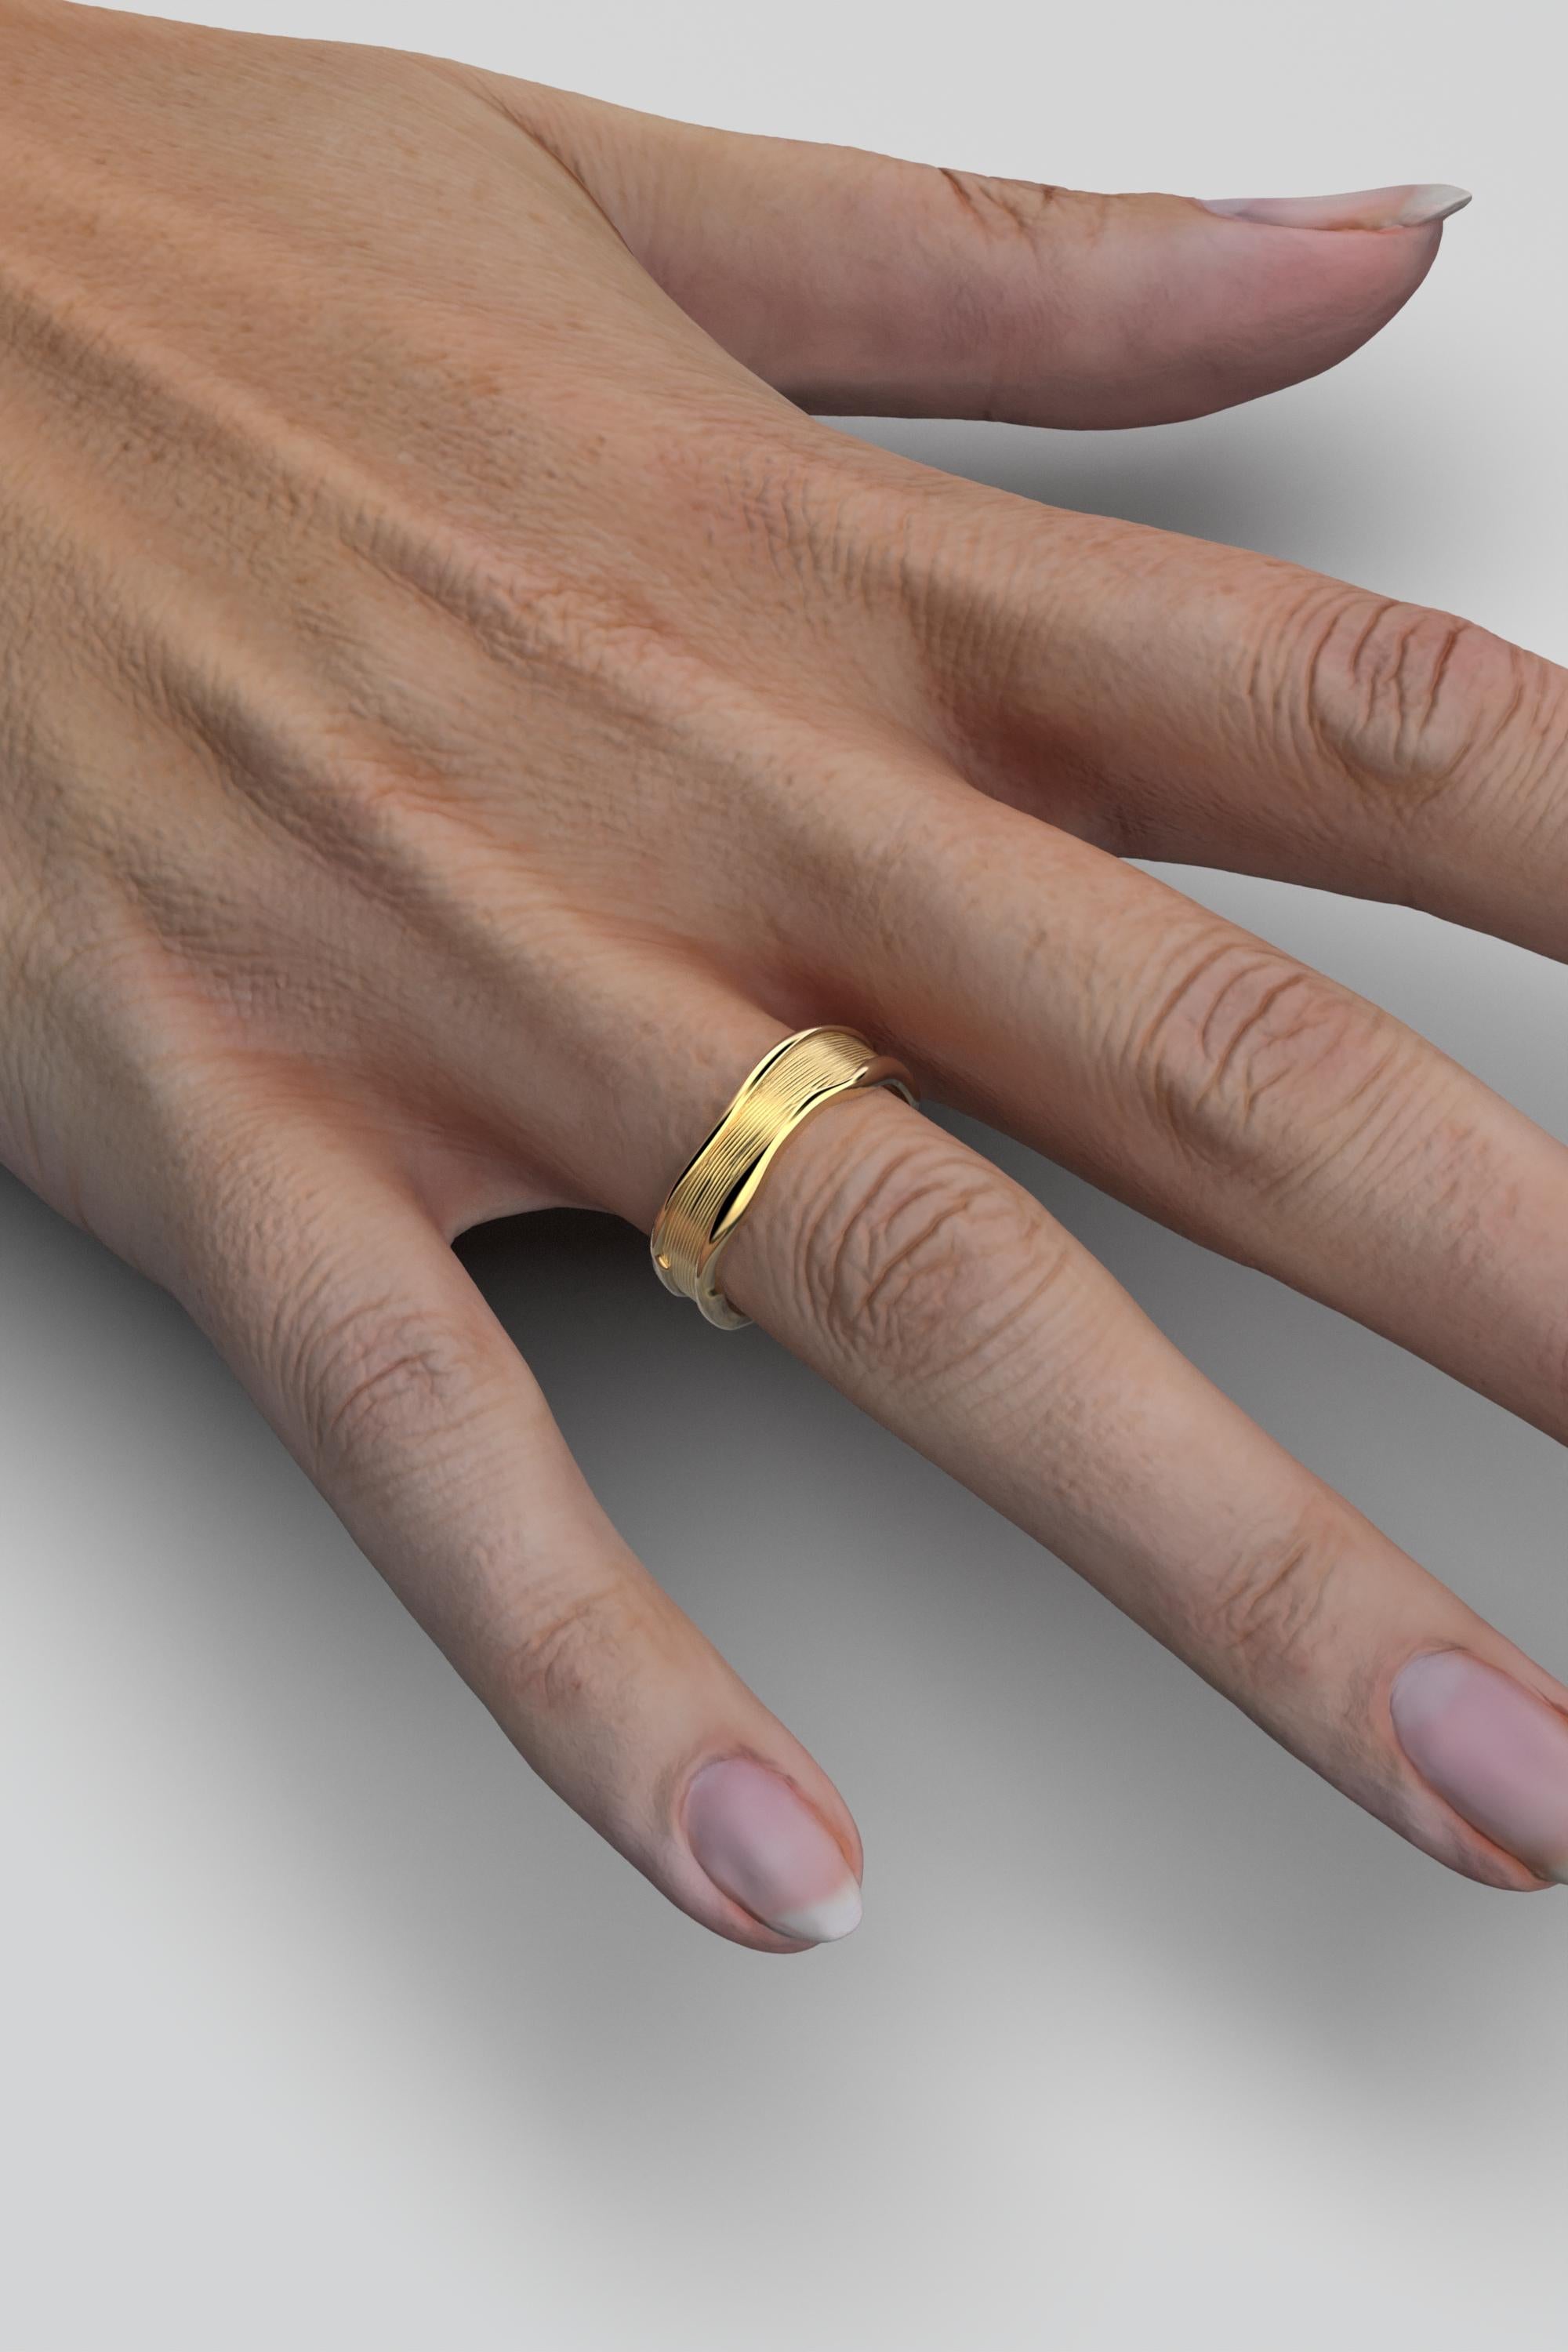 For Sale:  Unisex 18k Gold Band Ring with Hand-Engraved Organic Design Made in Italy 4